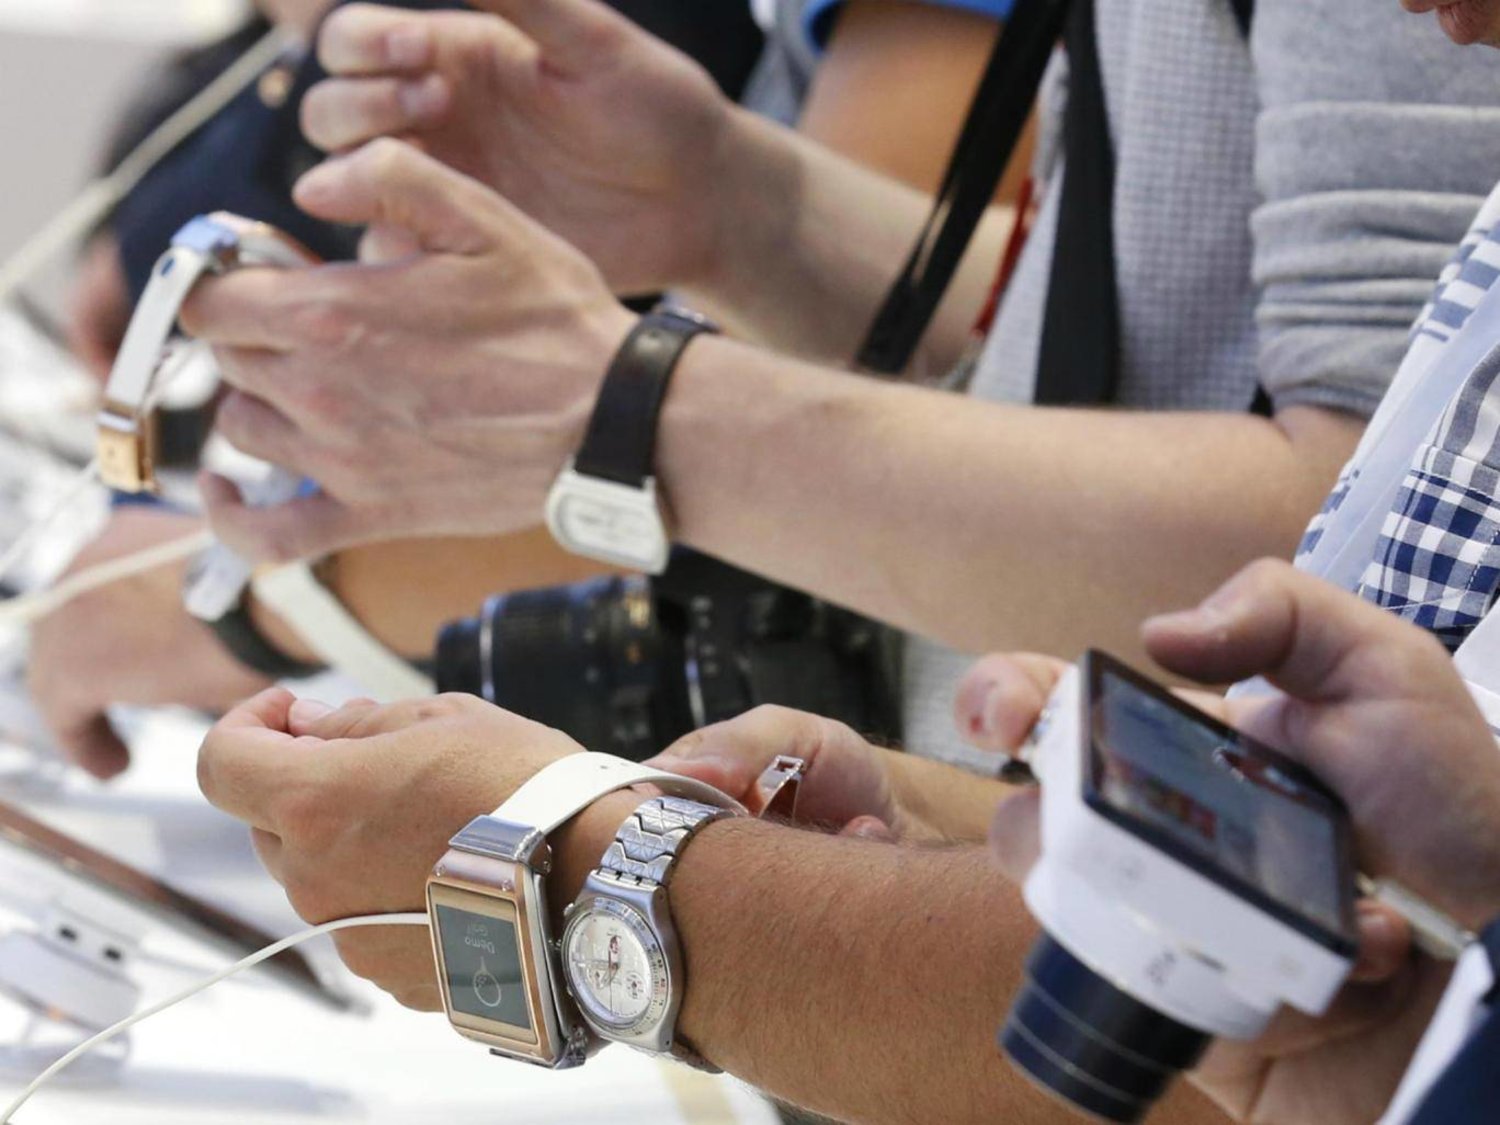  Journalists check out the Samsung Galaxy Gear smartwatch at the
booth of Samsung during a media preview day at the IFA consumer
electronics fair in Berlin, September 5, 2013 / REUTERS/Fabrizio
Bensch